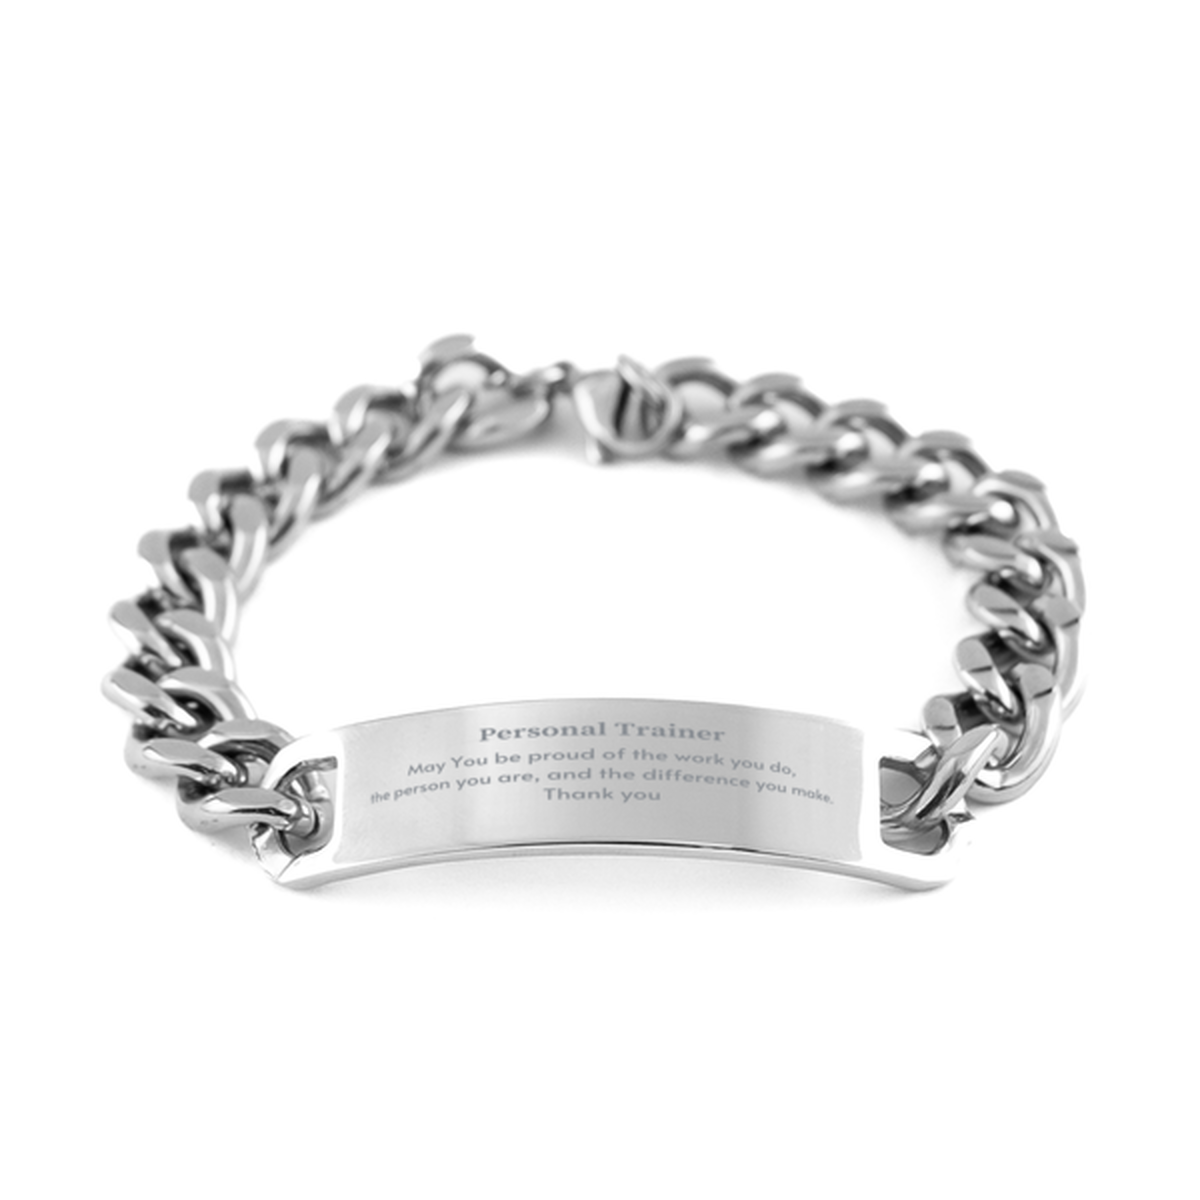 Heartwarming Cuban Chain Stainless Steel Bracelet Retirement Coworkers Gifts for Personal Trainer, Personal Trainer May You be proud of the work you do, the person you are Gifts for Boss Men Women Friends